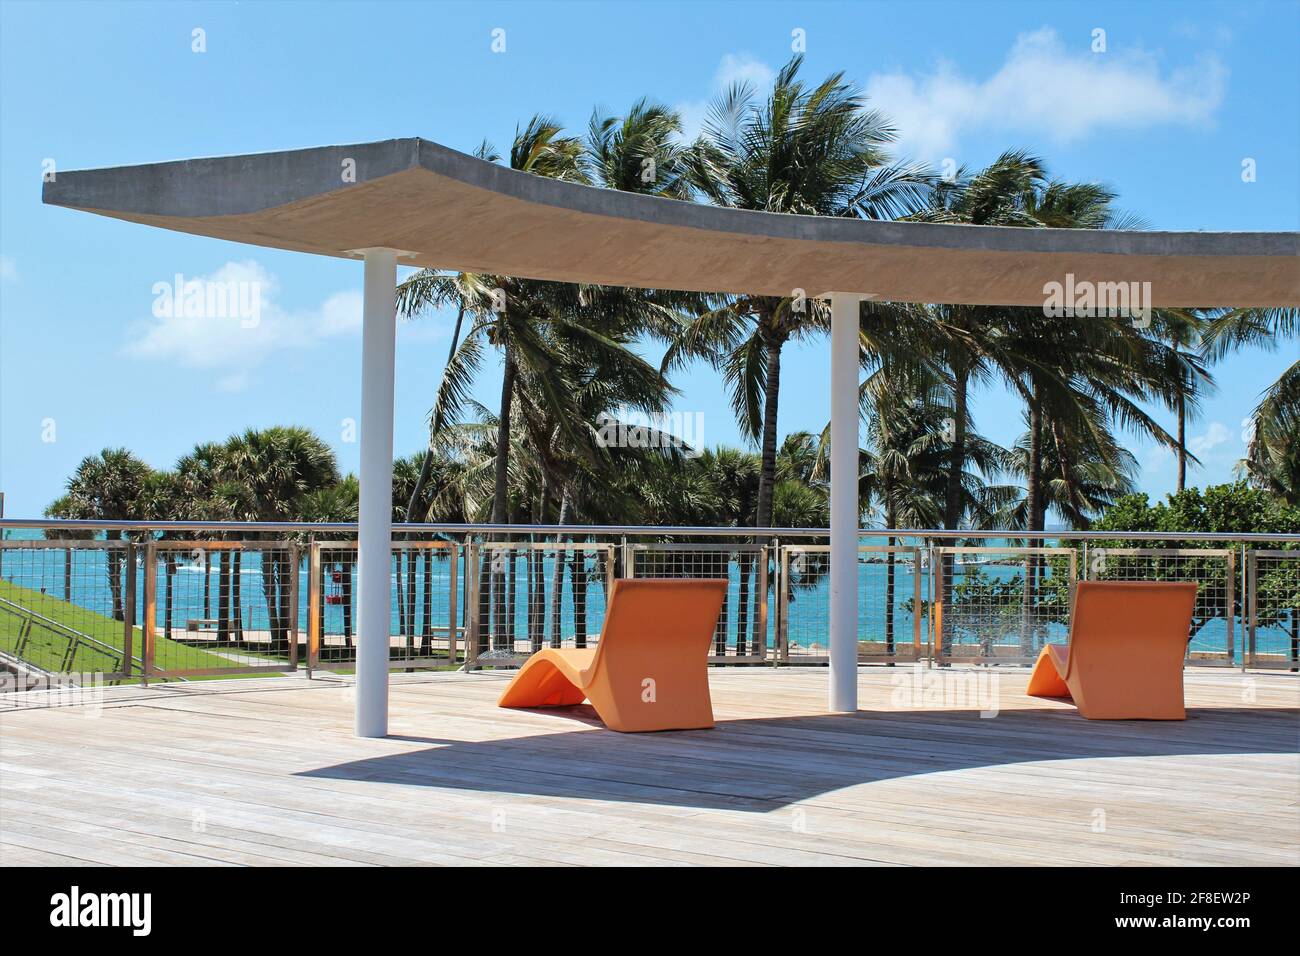 Beautiful outdoor lounge area with orange beach chairs underneath shade. Tropical paradise hotel vacation in Miami Beach Florida. Stock Photo